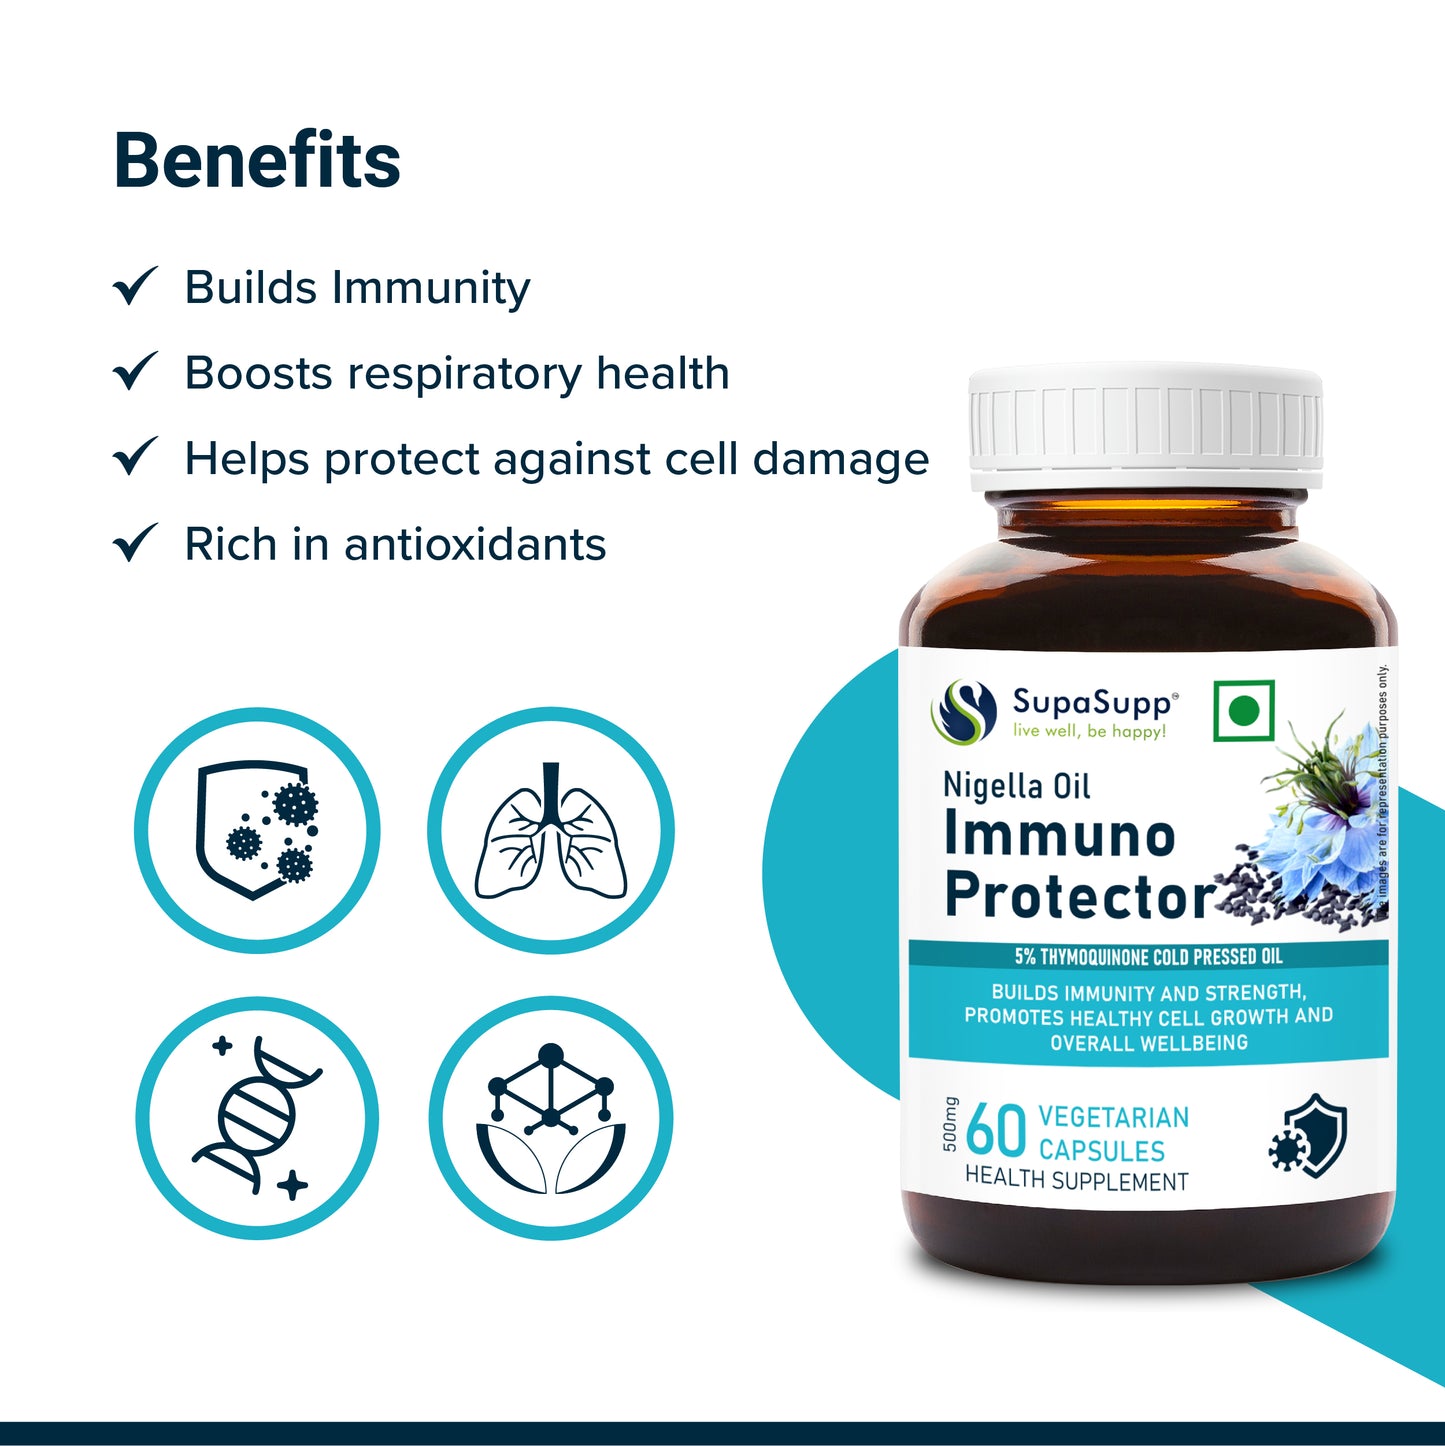 SupaSupp Nigella Oil Immuno Protector | Builds Immunity And Strength, Promotes Healthy Cell Growth And Overall Wellbeing | Health Supplement | 60 Veg Cap, 500 mg